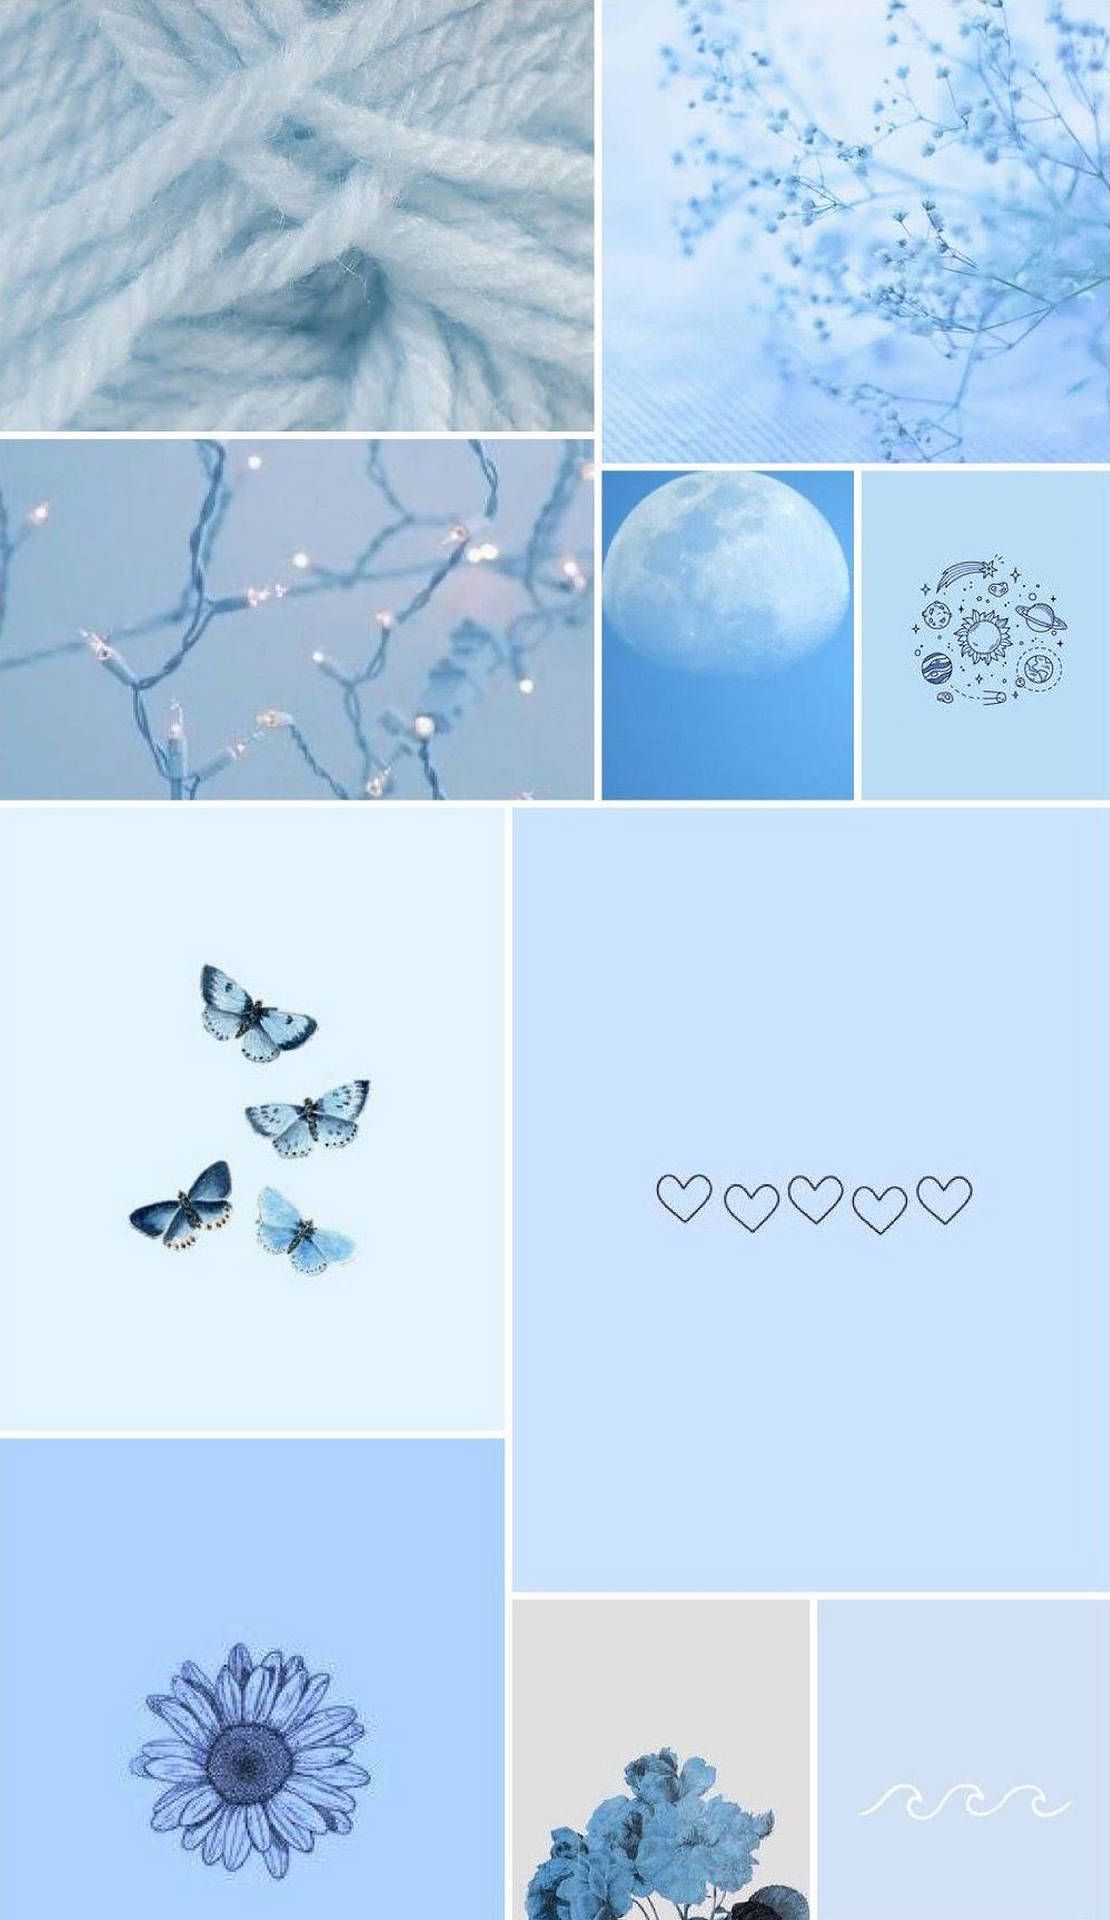 Blue aesthetic wallpaper collage with butterflies, flowers, and the moon - Phone, blue